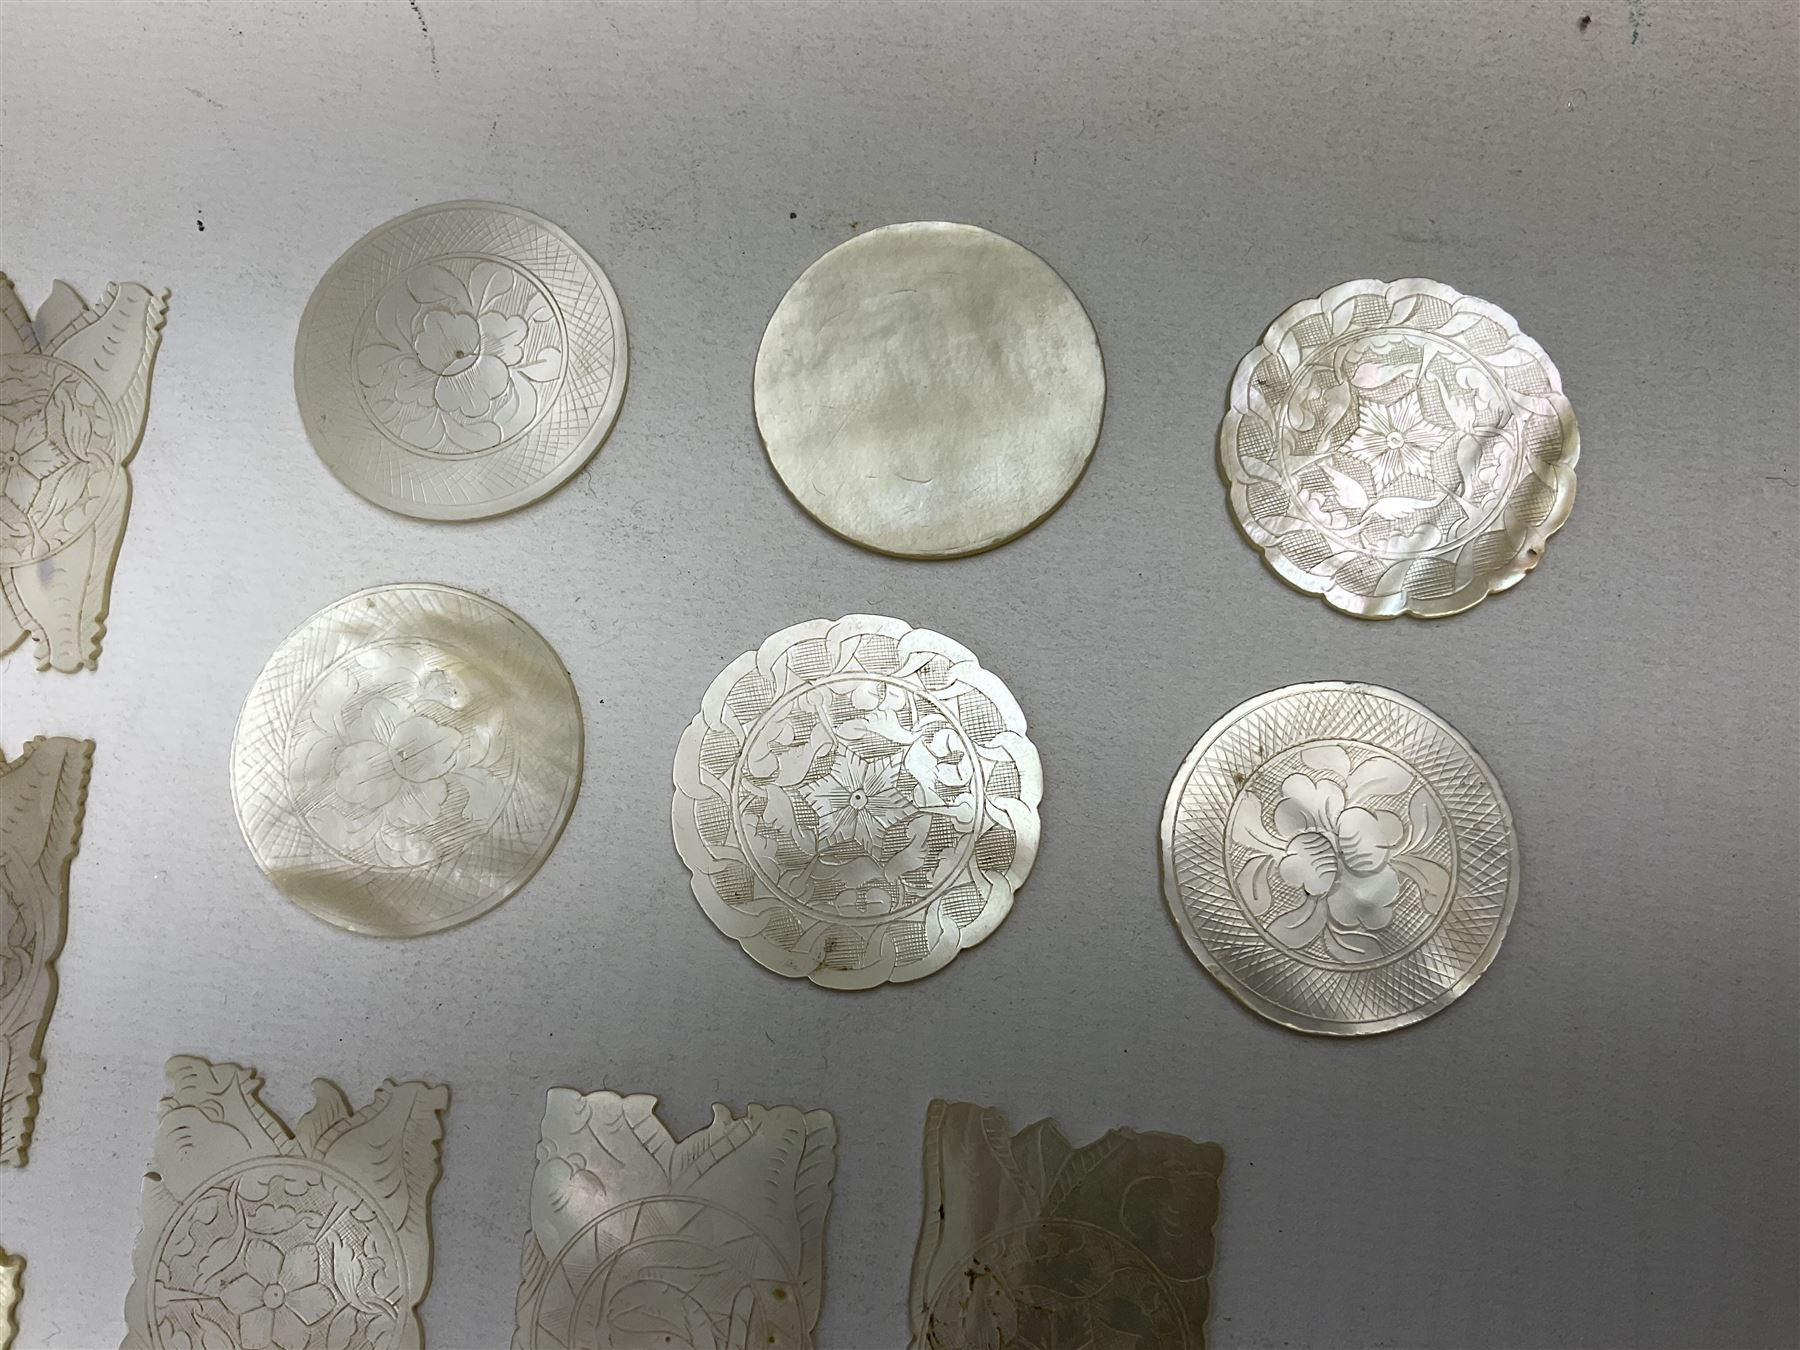 Collection of fifty two Chinese mother of pearl gaming counters or tokens - Image 4 of 5